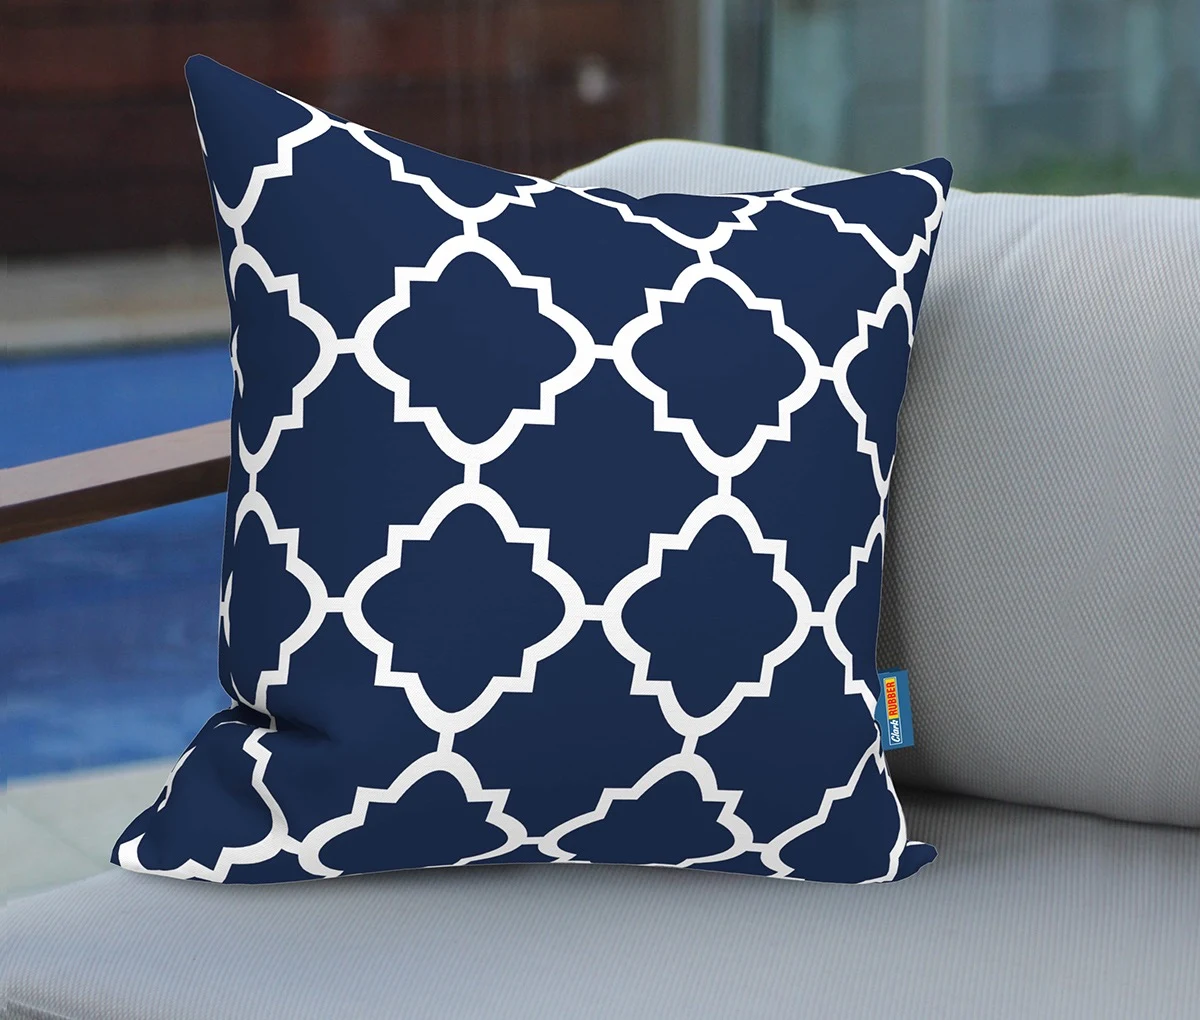 Designer Scatter Cushion Blue and White Geo Pattern